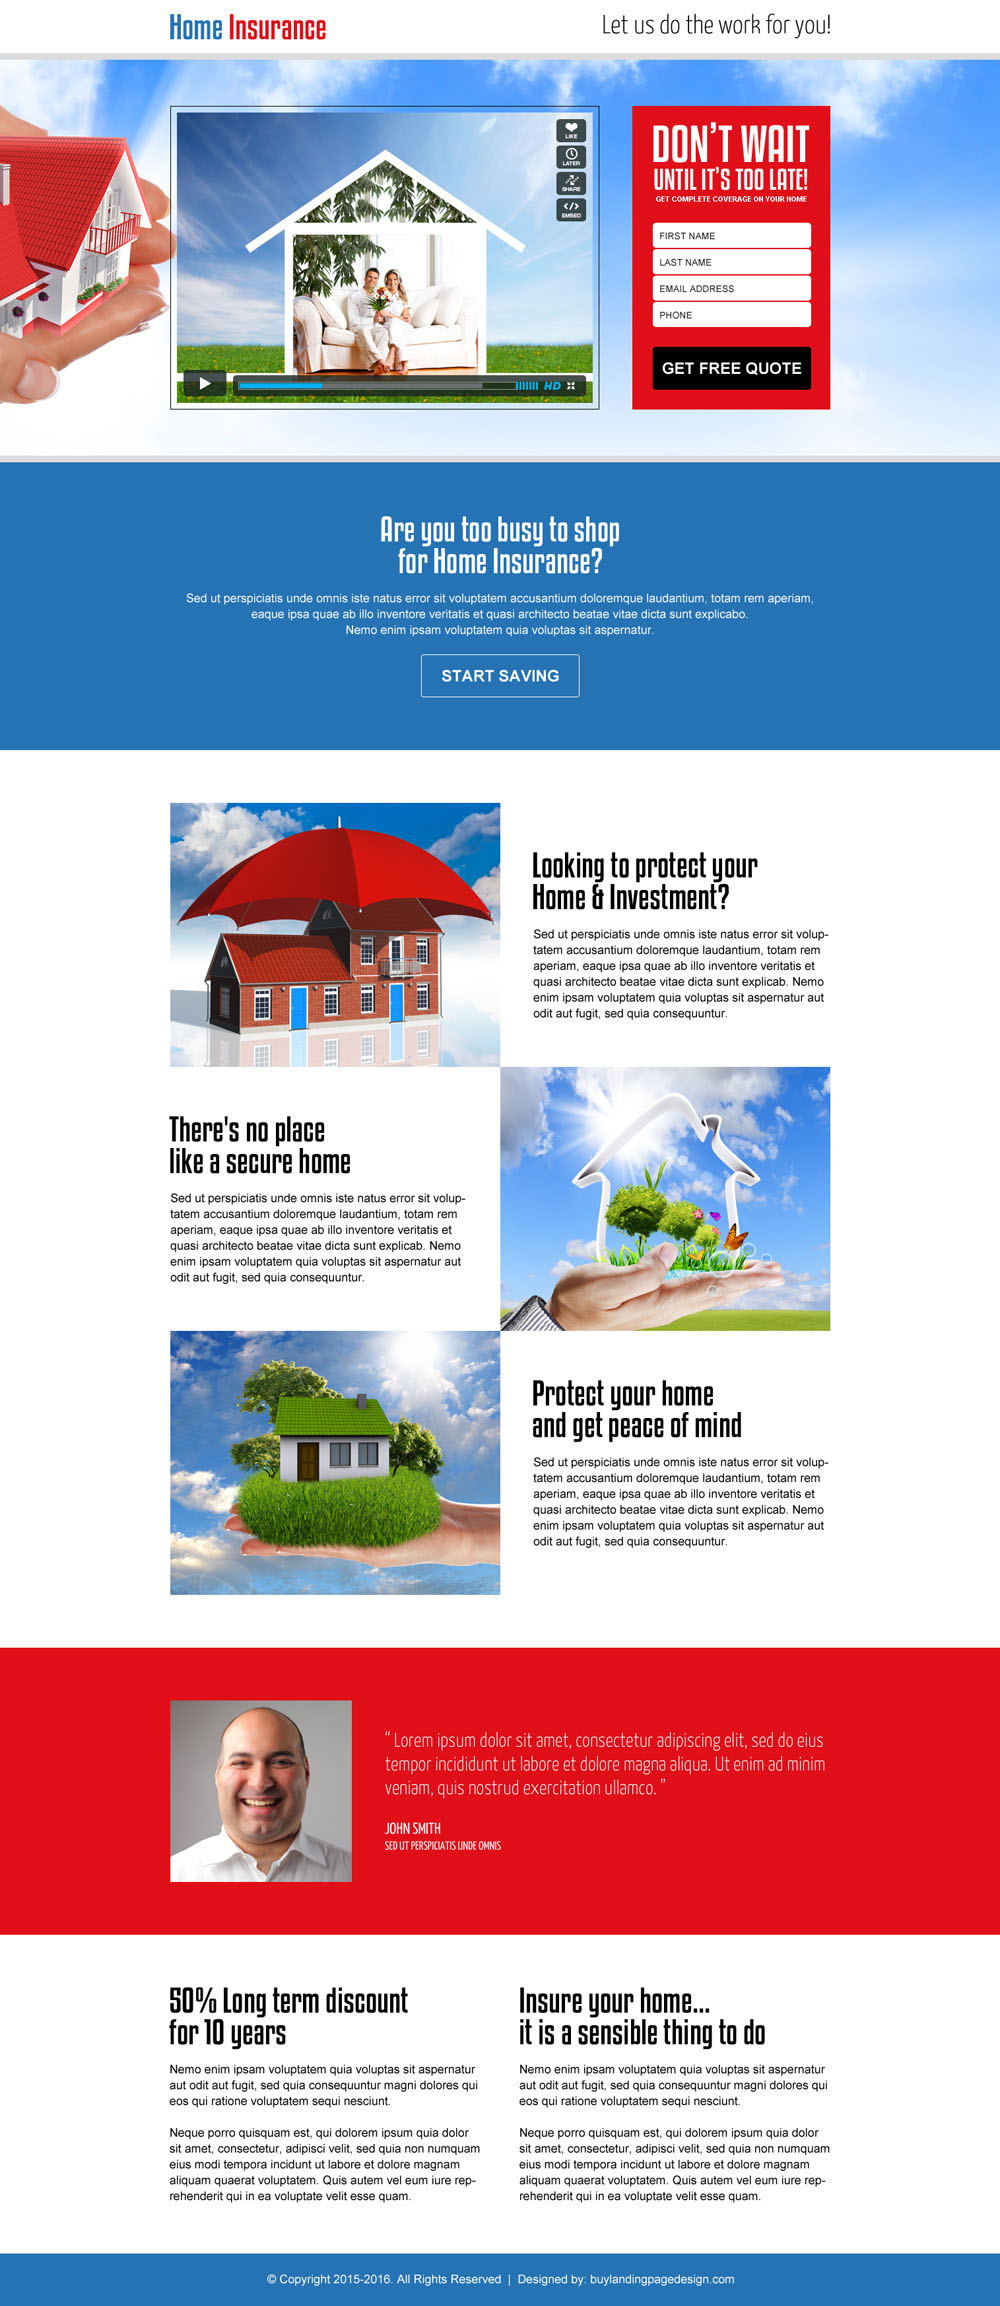 home-insurance-lead-generation-video-landing-page-design-025